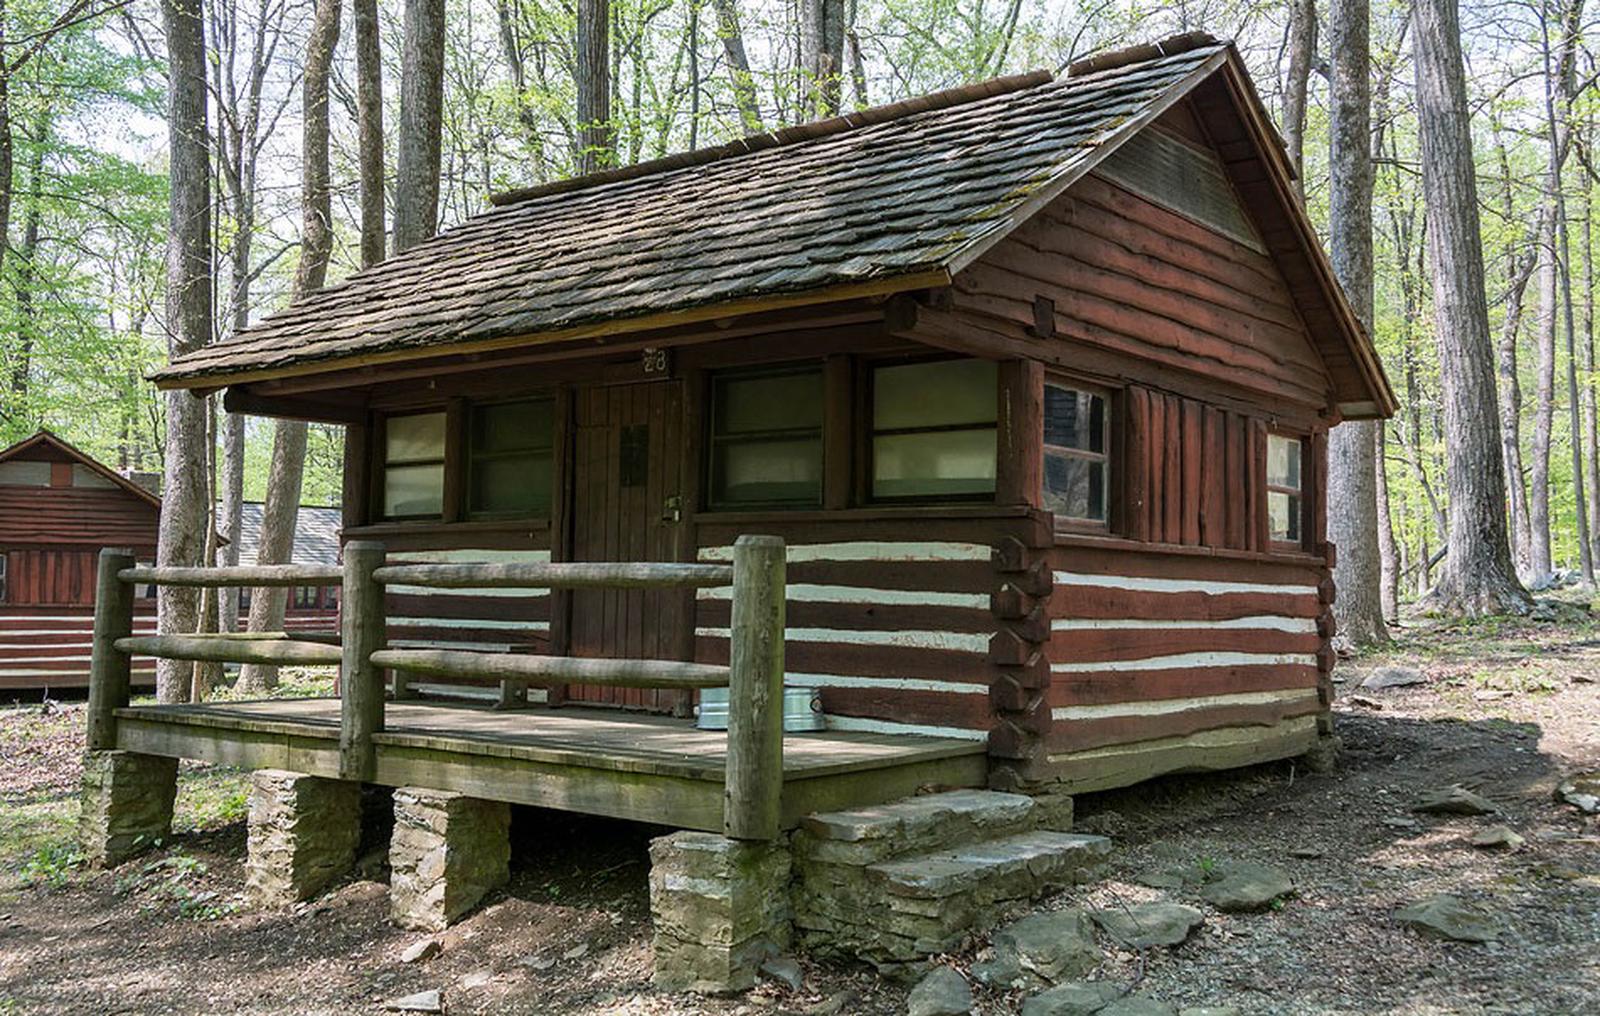 Camp Misty Mount Cabin 28Camp Misty Mount Cabin 28. An American chestnut log cabin with a porch and stone stairs on the front of the cabin.